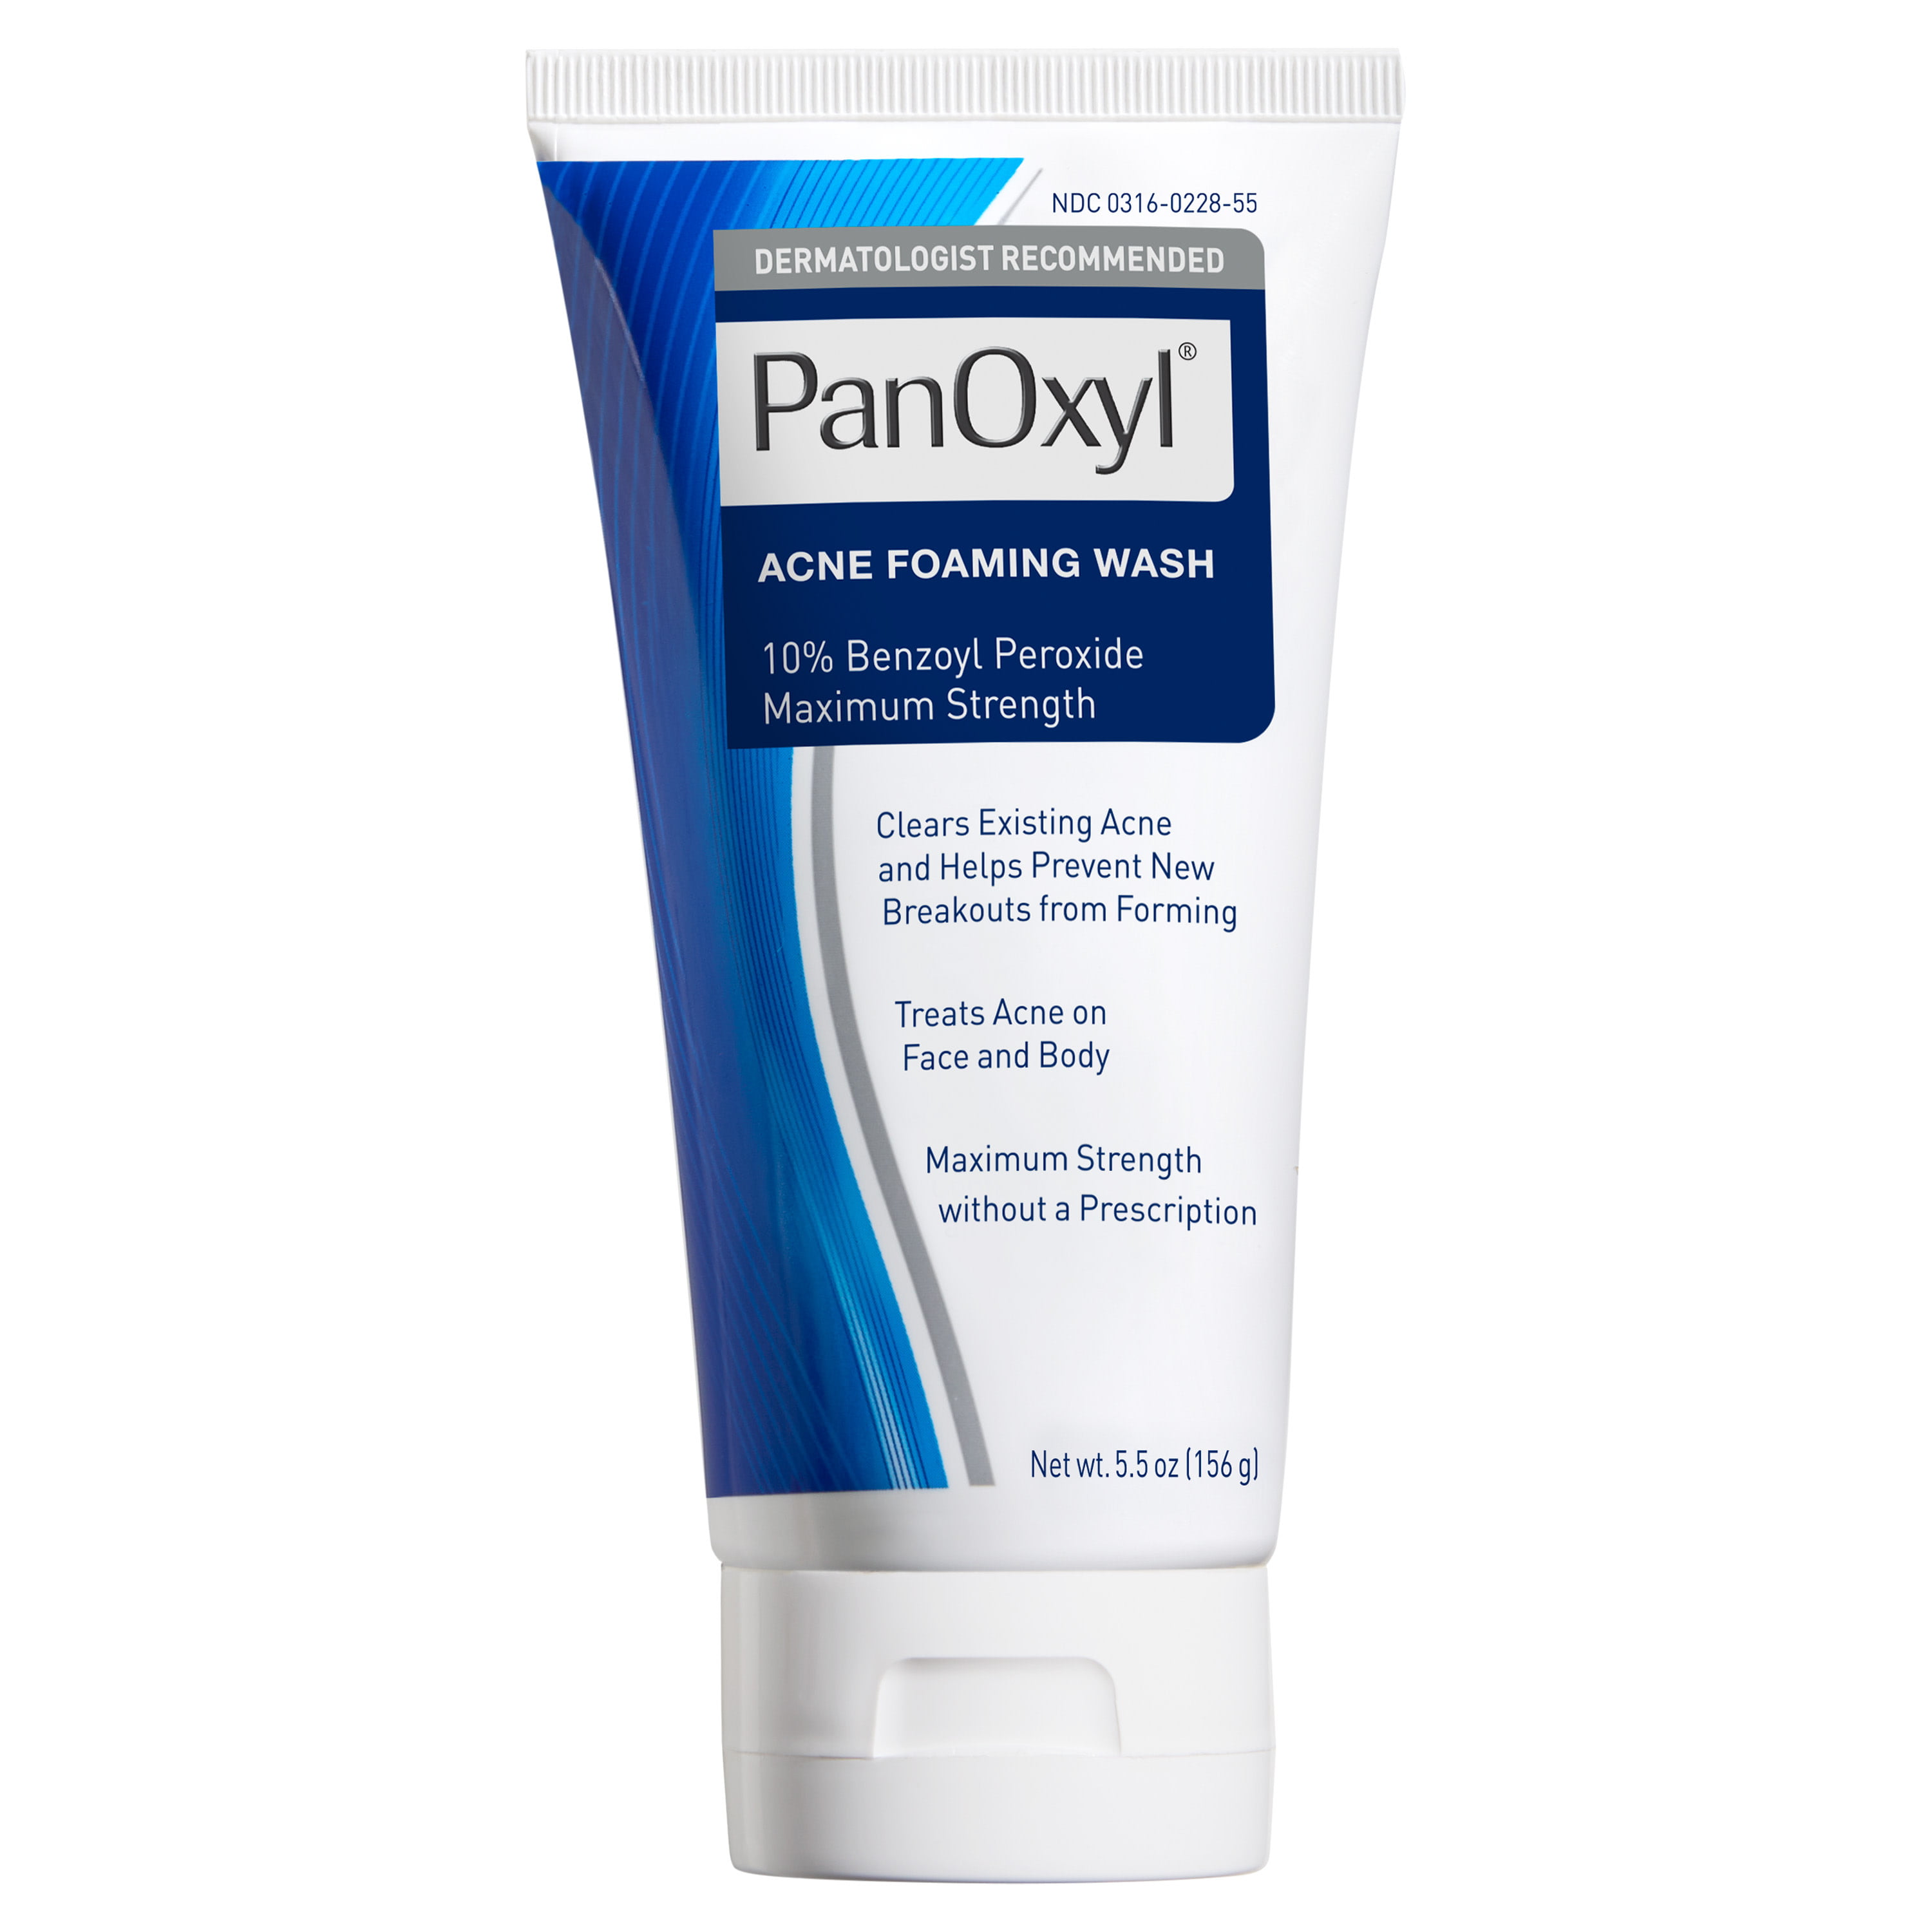 PanOxyl Max Strength Acne Foaming Wash, Face & Body, 10% Benzoyl Peroxide, All S